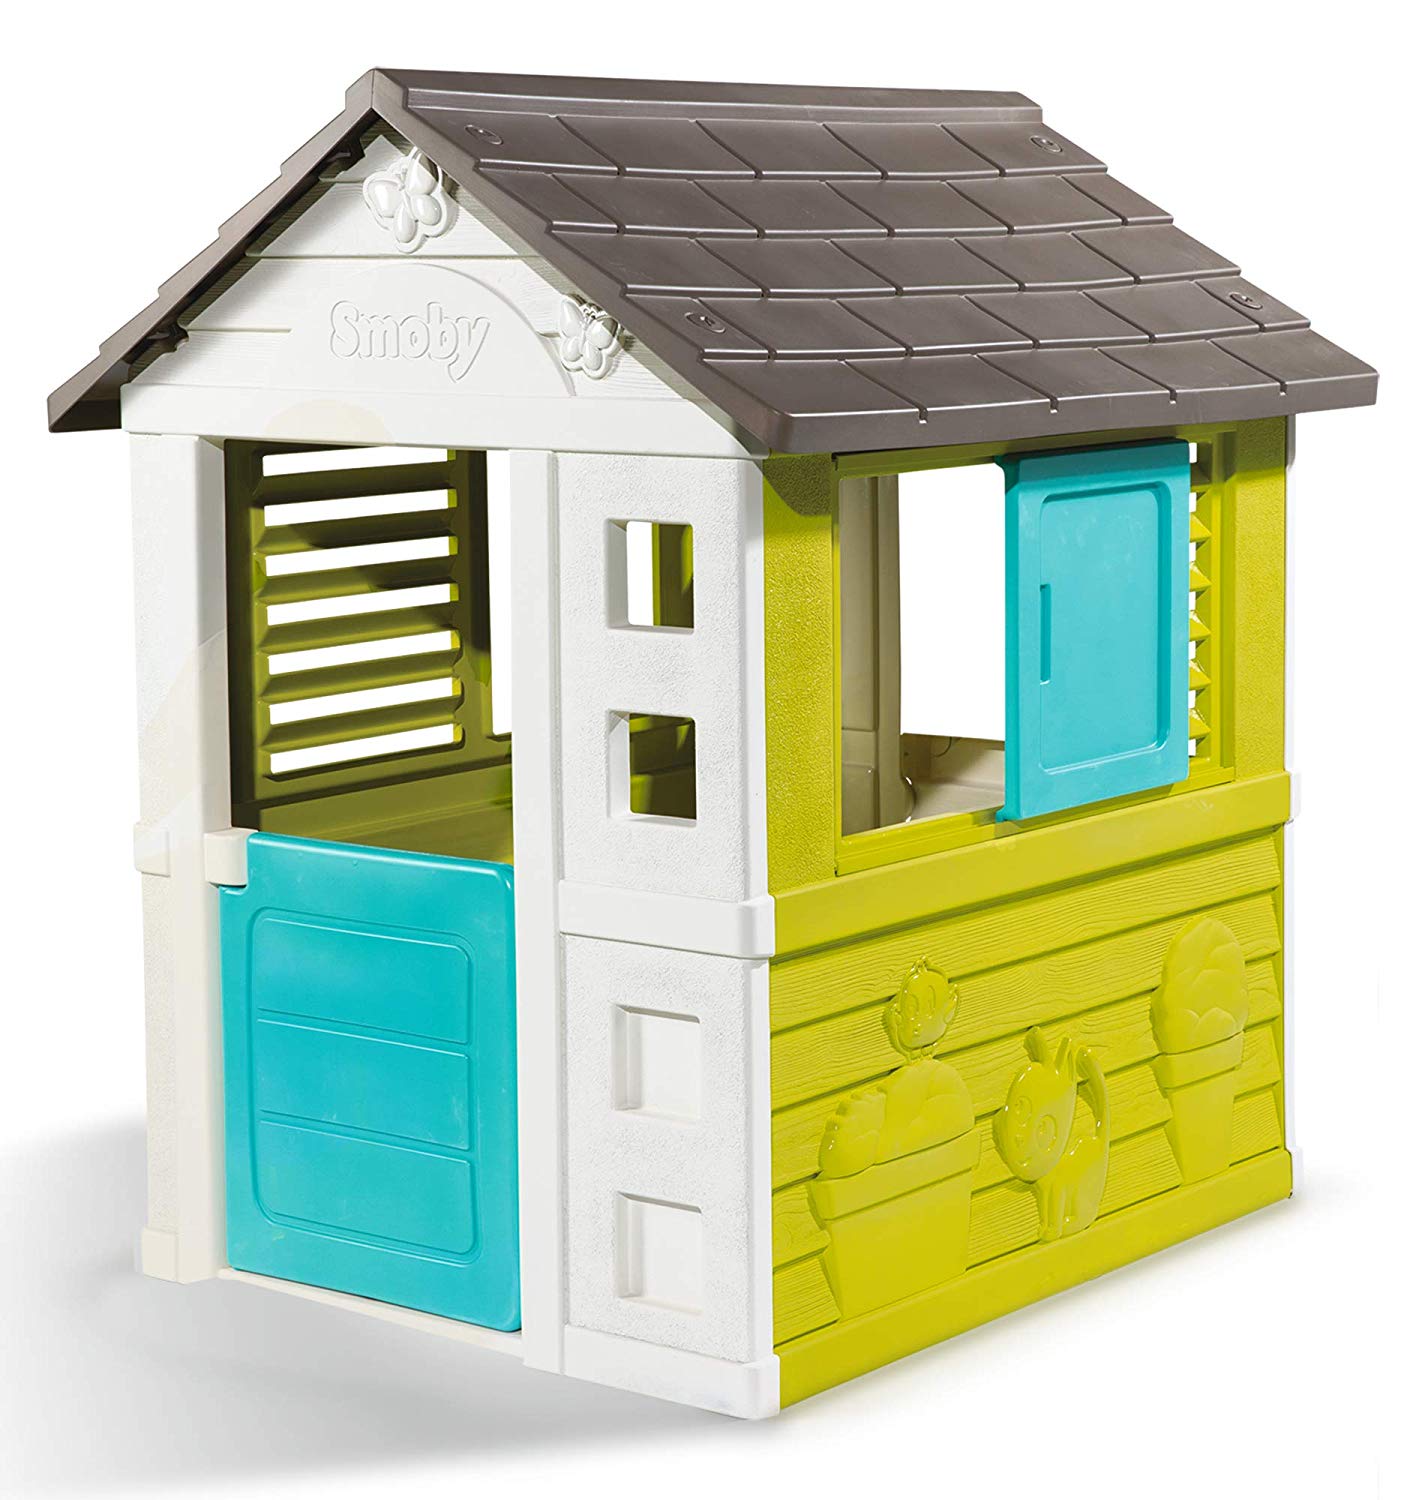 Smoby Pretty 810710 Play House Grey / Green / Turquoise